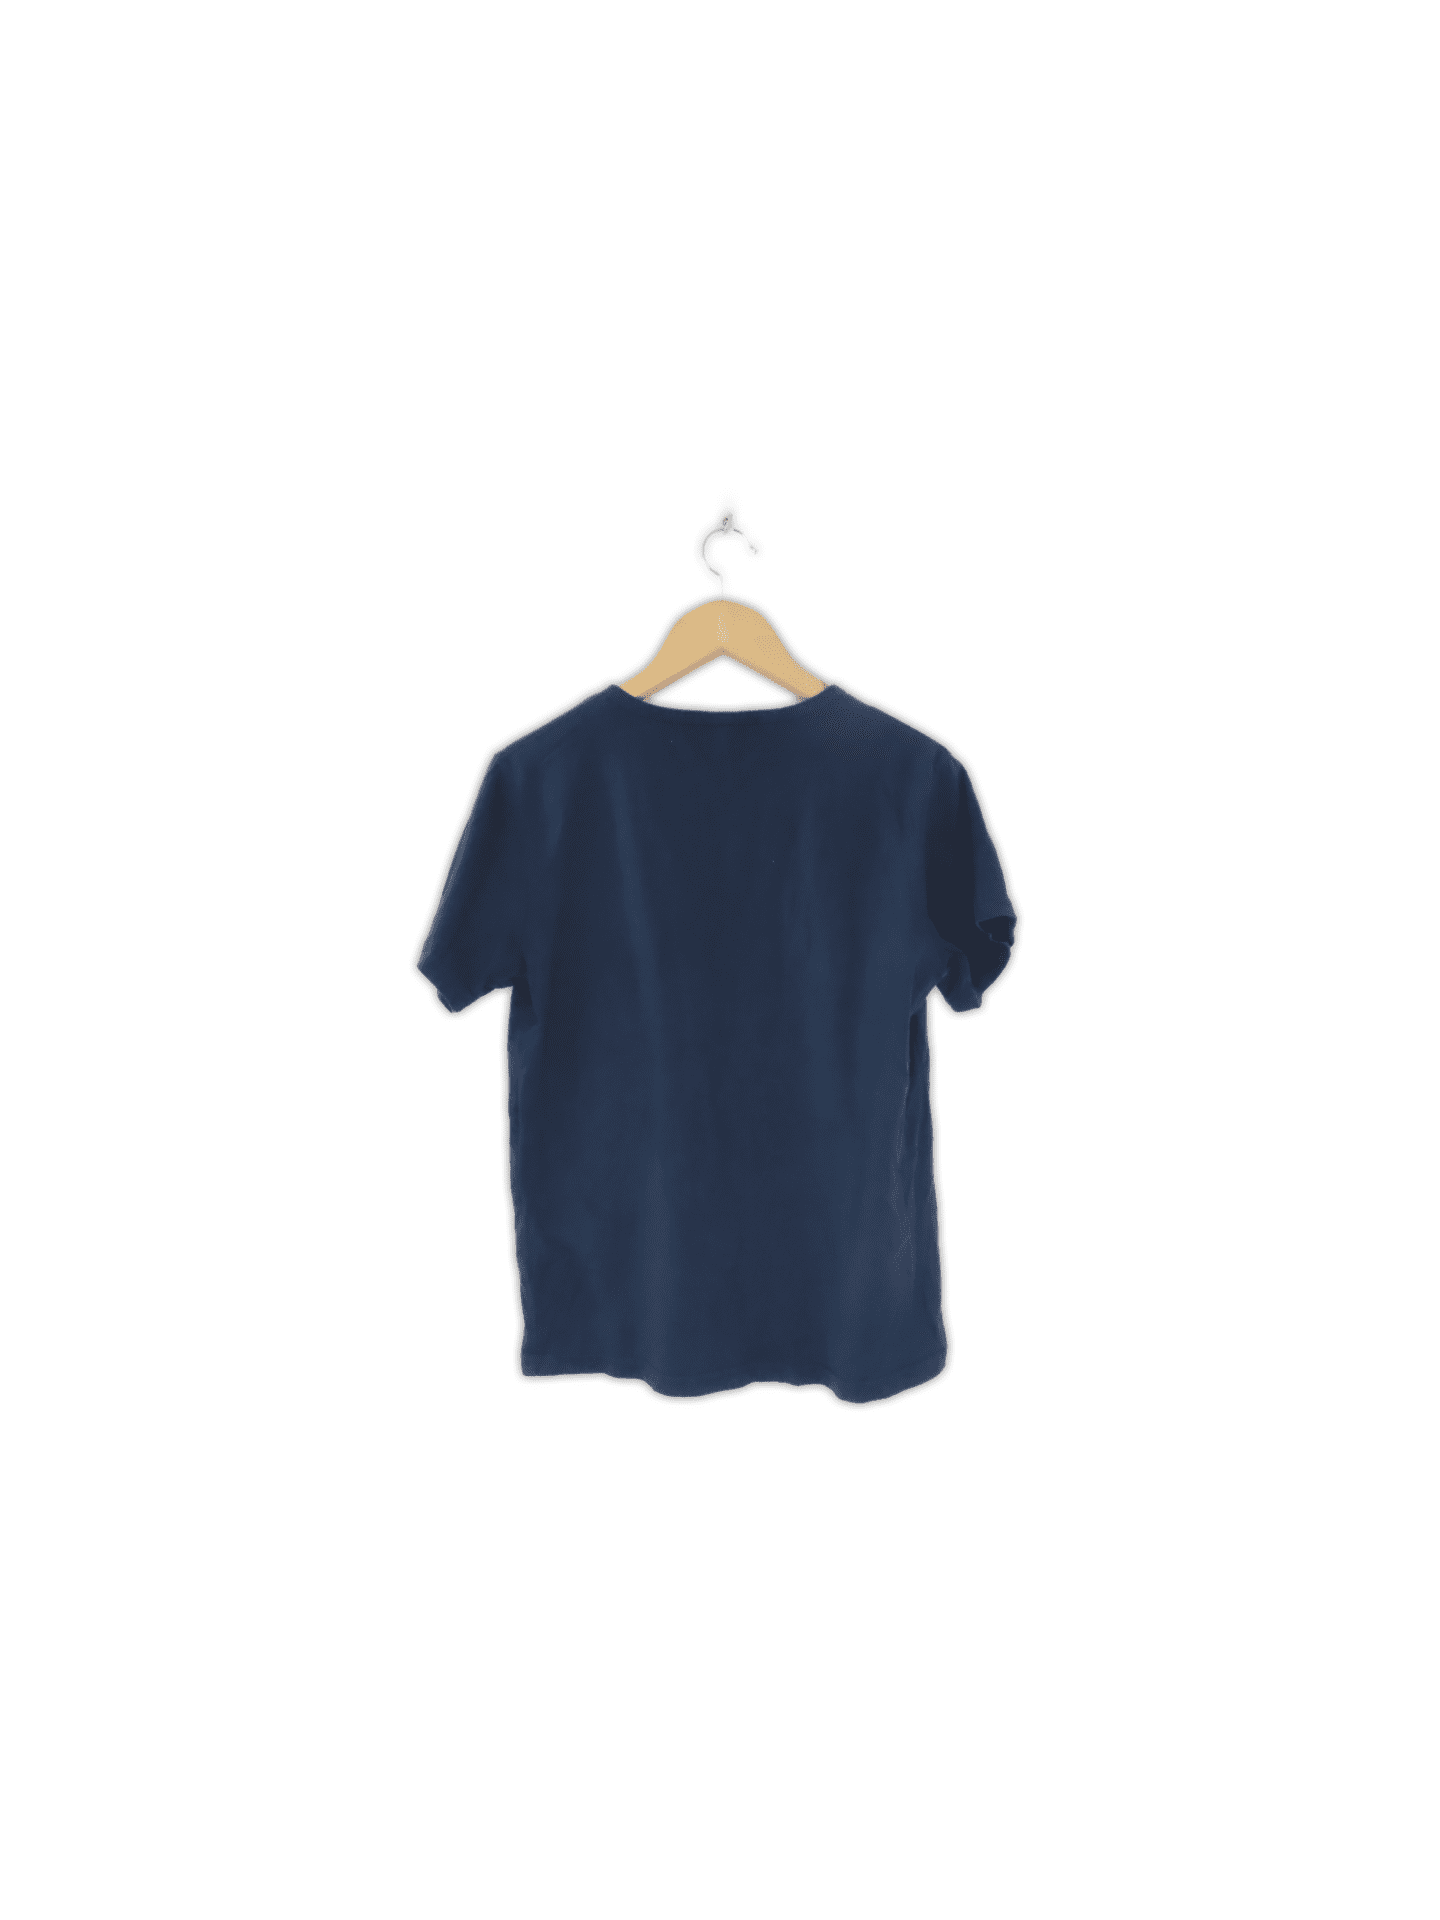 Light weight cotton tee featuring Tommy Hilfiger emblem. Navy Blue in colour